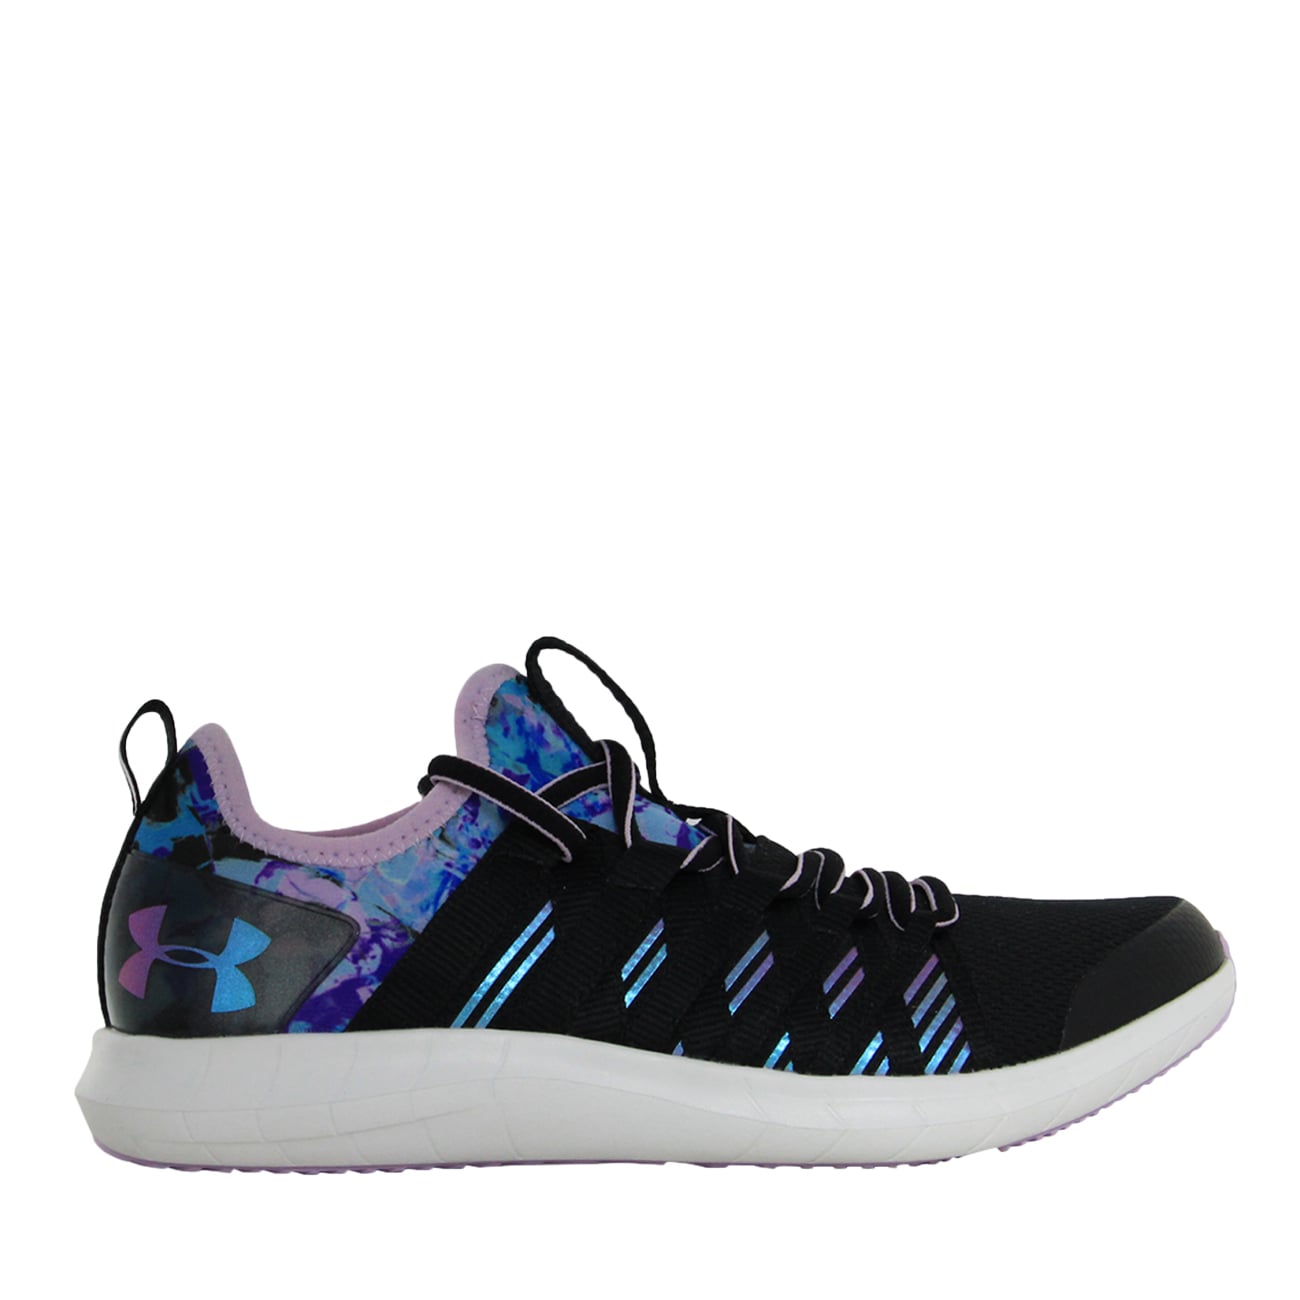 Under Armour Girls GGS Infinity MB Gym Fitness Trainers Sneakers Shoes BHFO 6313